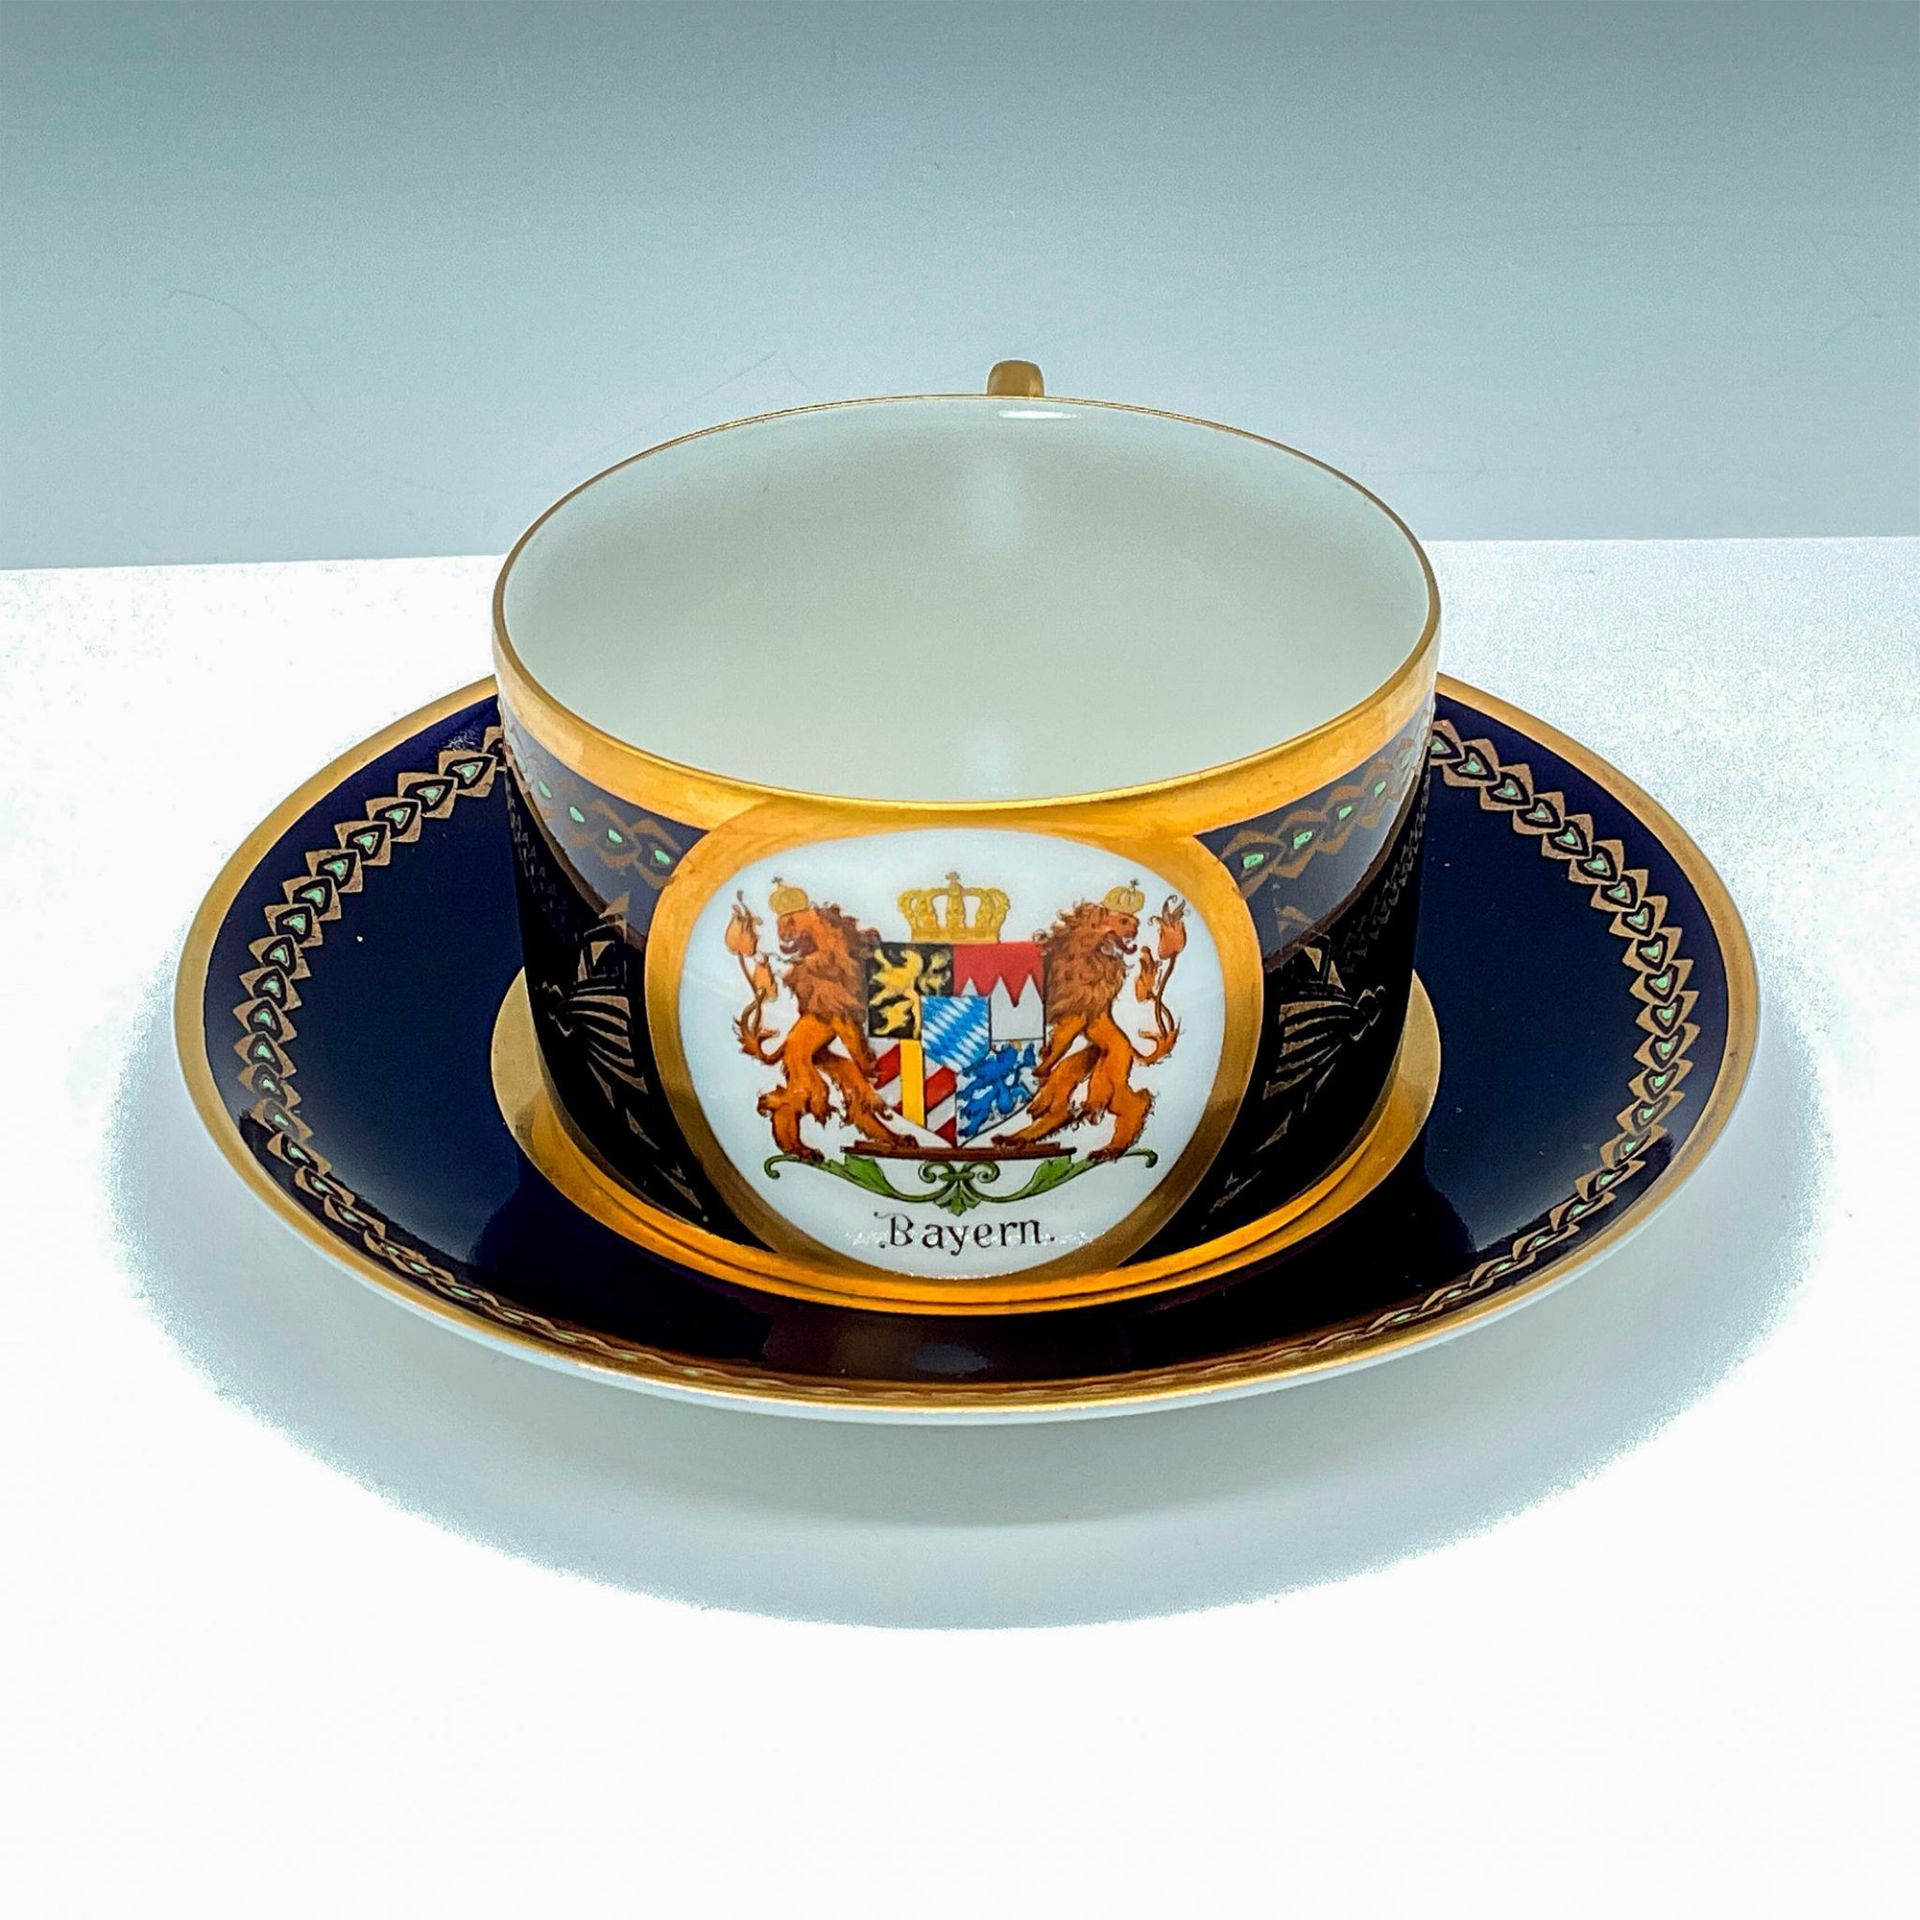 Porcelain Cup and Saucer in Cobalt Blue and Gold Bayern